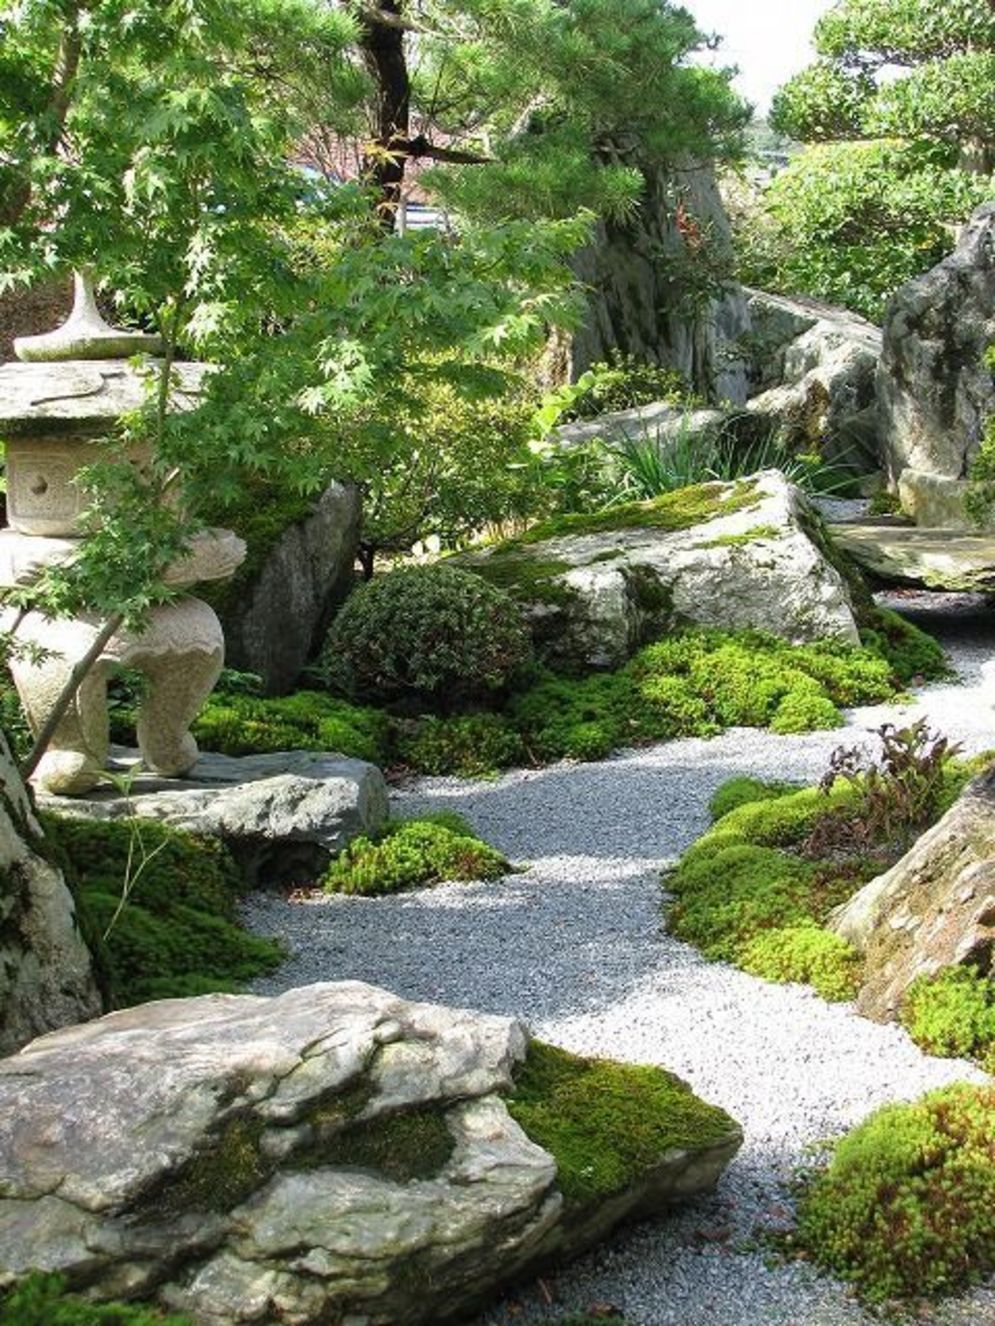 Japanese Rock Garden: History, Facts, Design and Ideas - Go Get Yourself